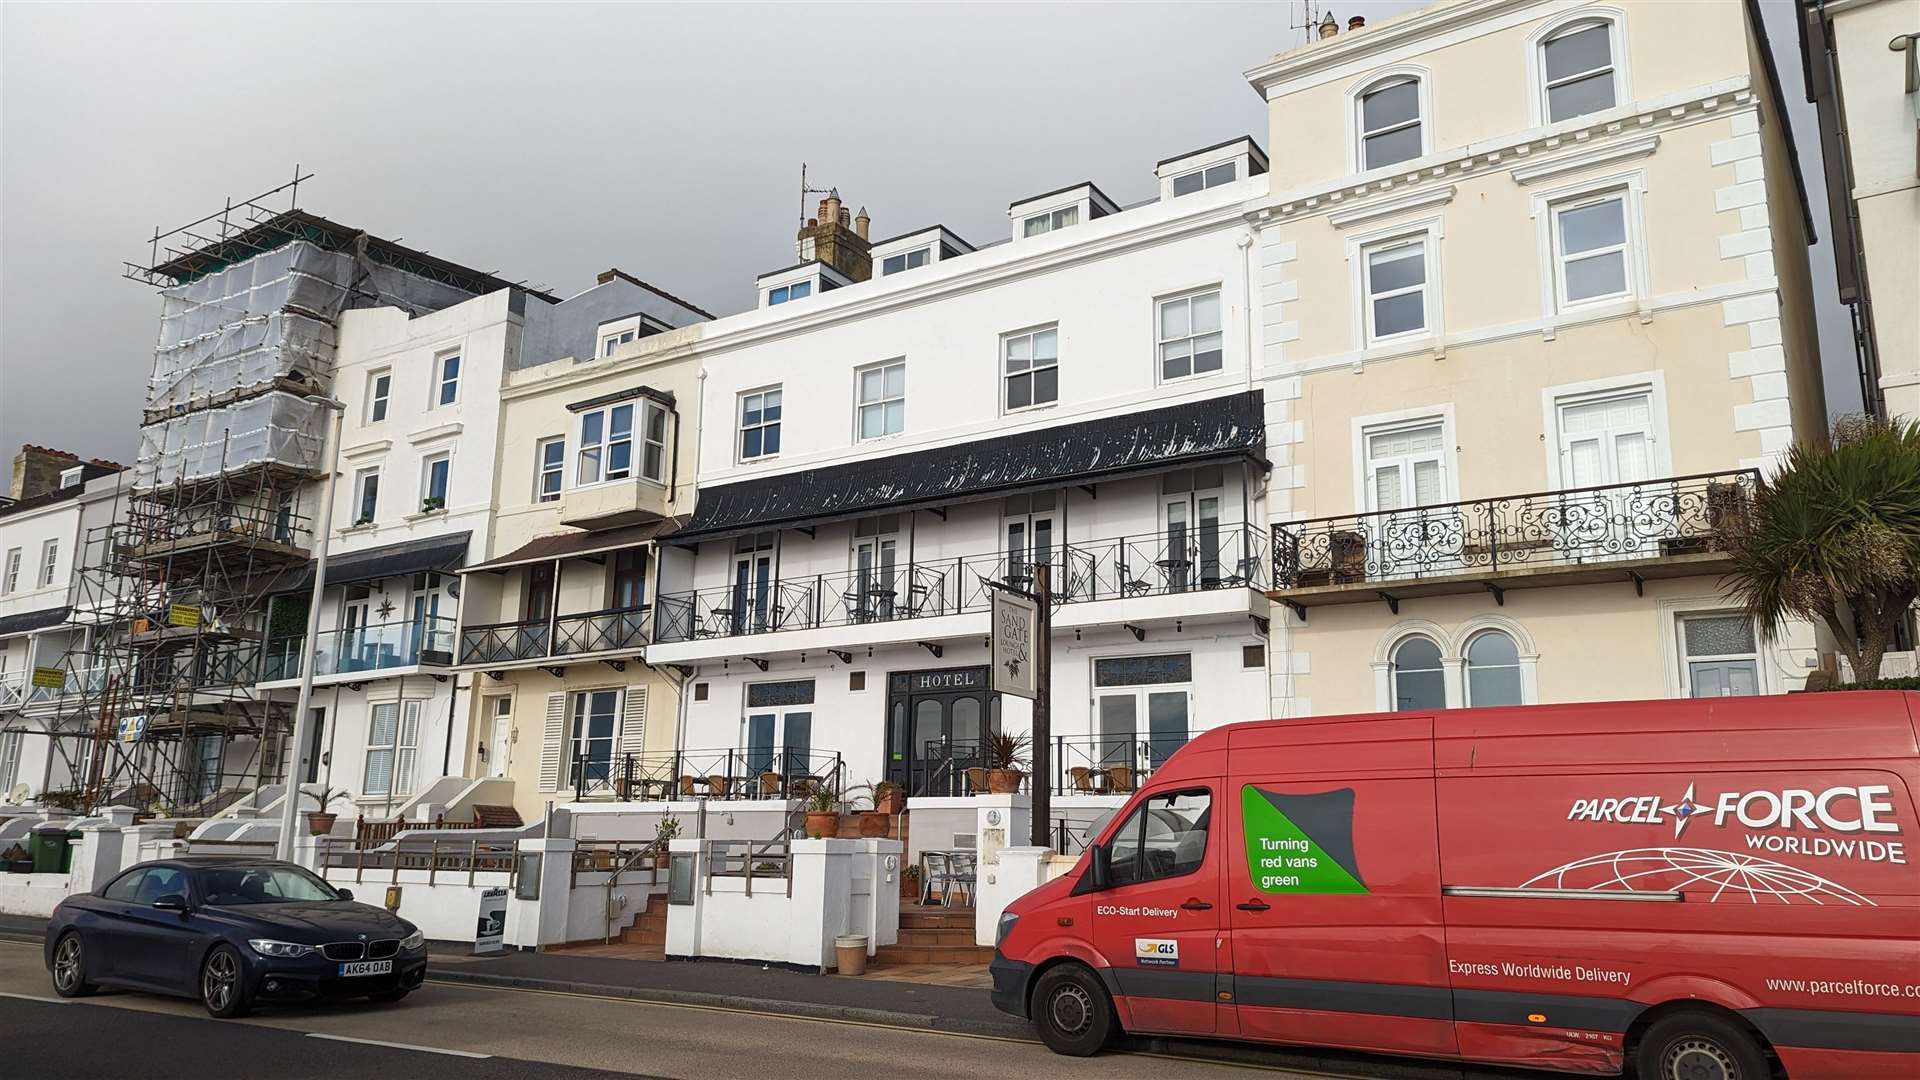 The hotel, which sits in Wellington Place along Sandgate Esplanade, has been loved by many, and several former visitors to the hotel have expressed their sadness over its closure